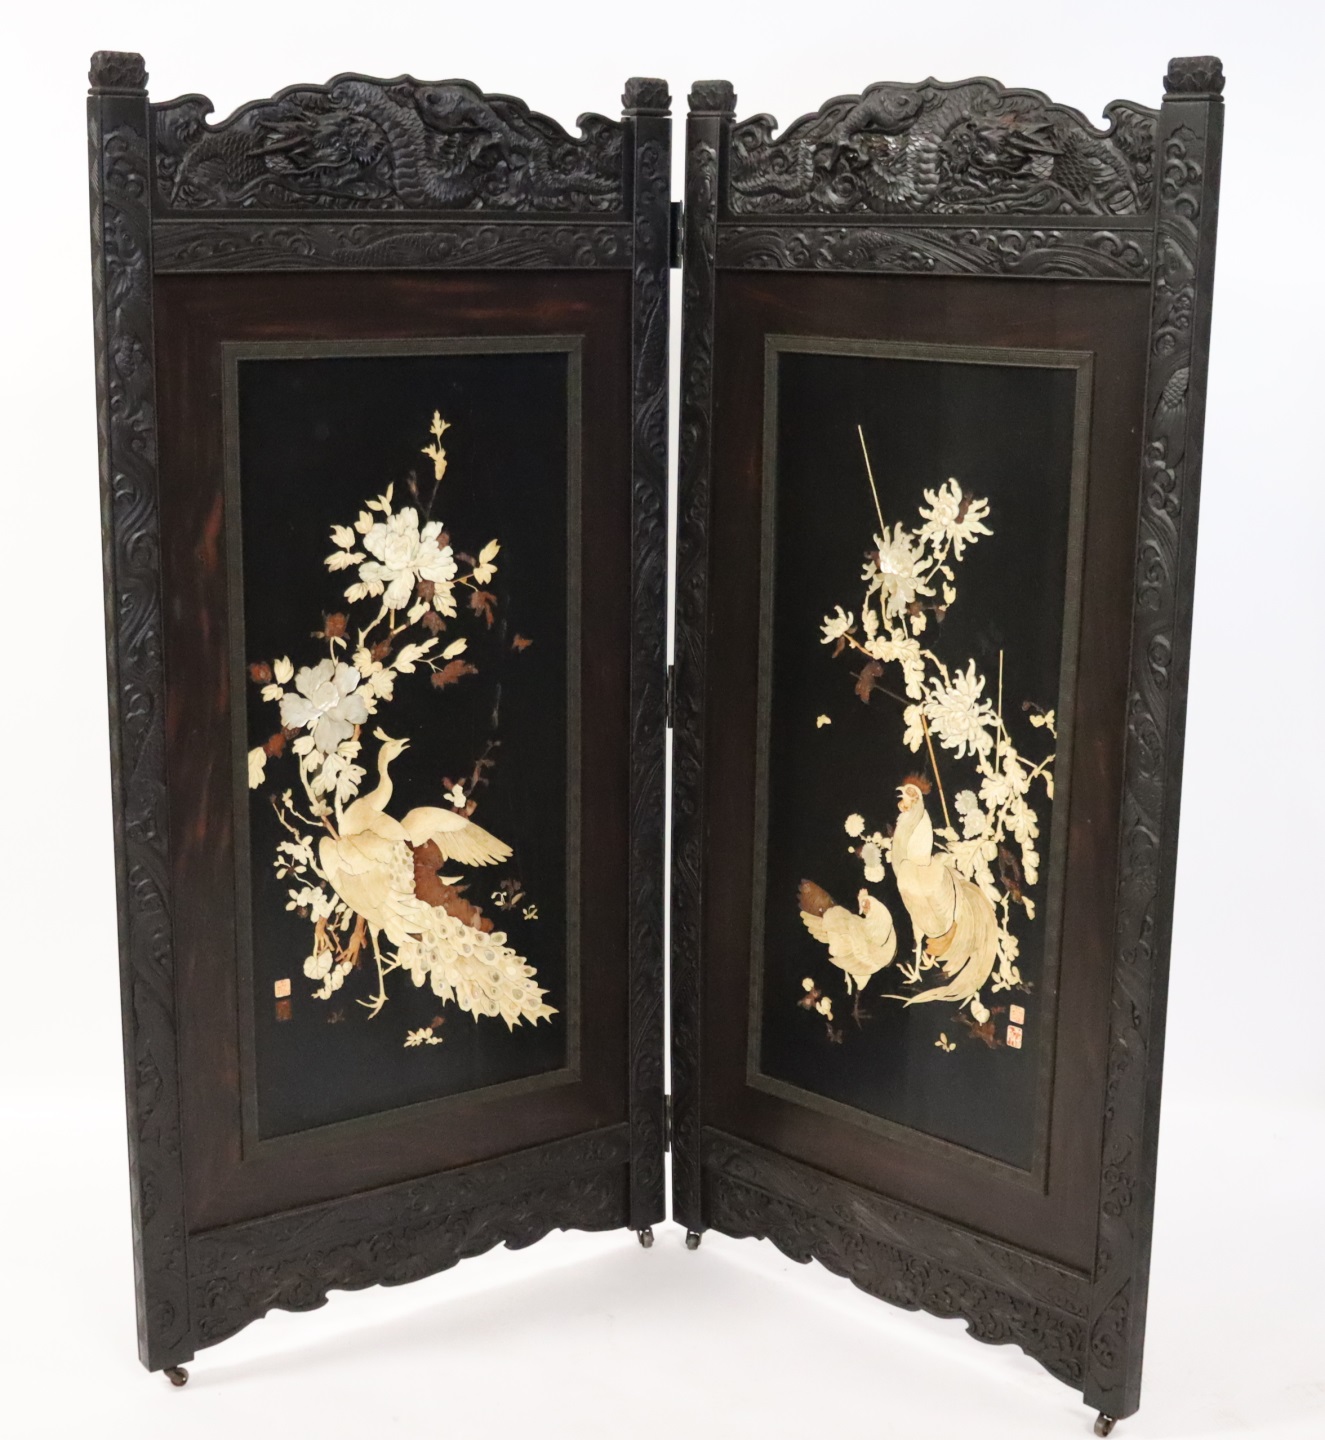 ANTIQUE JAPANESE CARVED AND LACQUERED